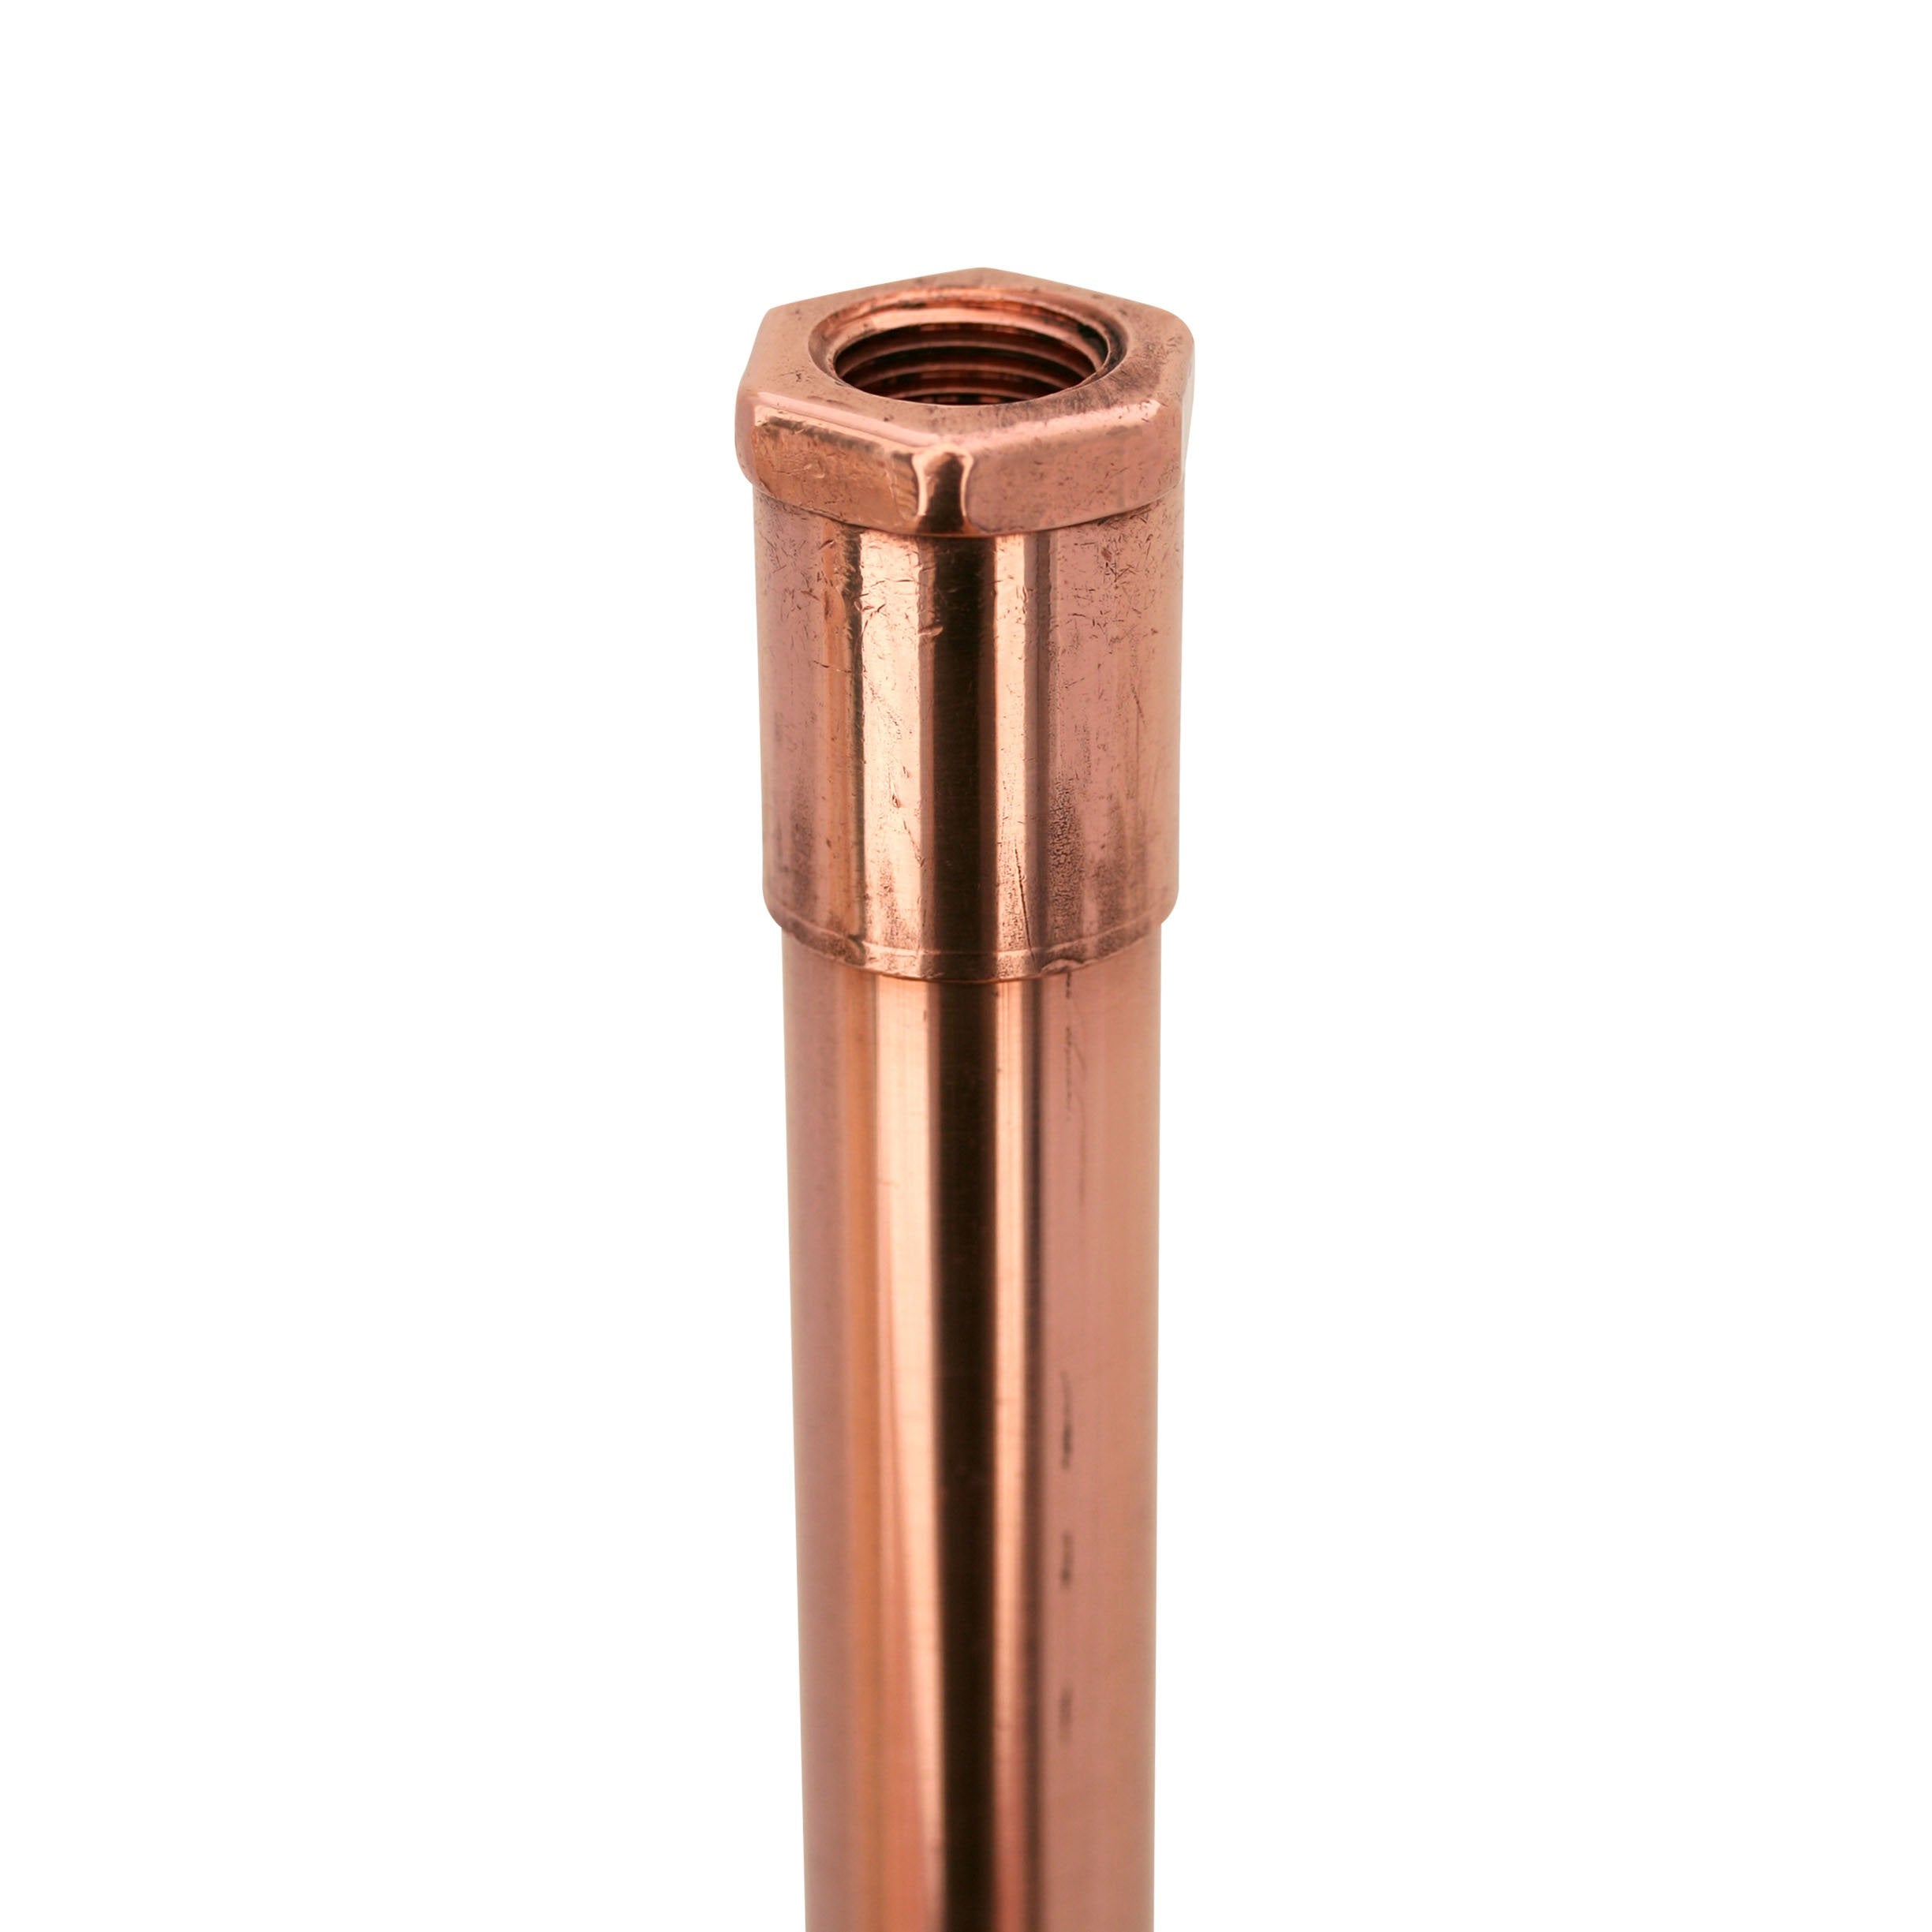 CopperMoon Custom Copper Stem ONLY for CM.6018 path light